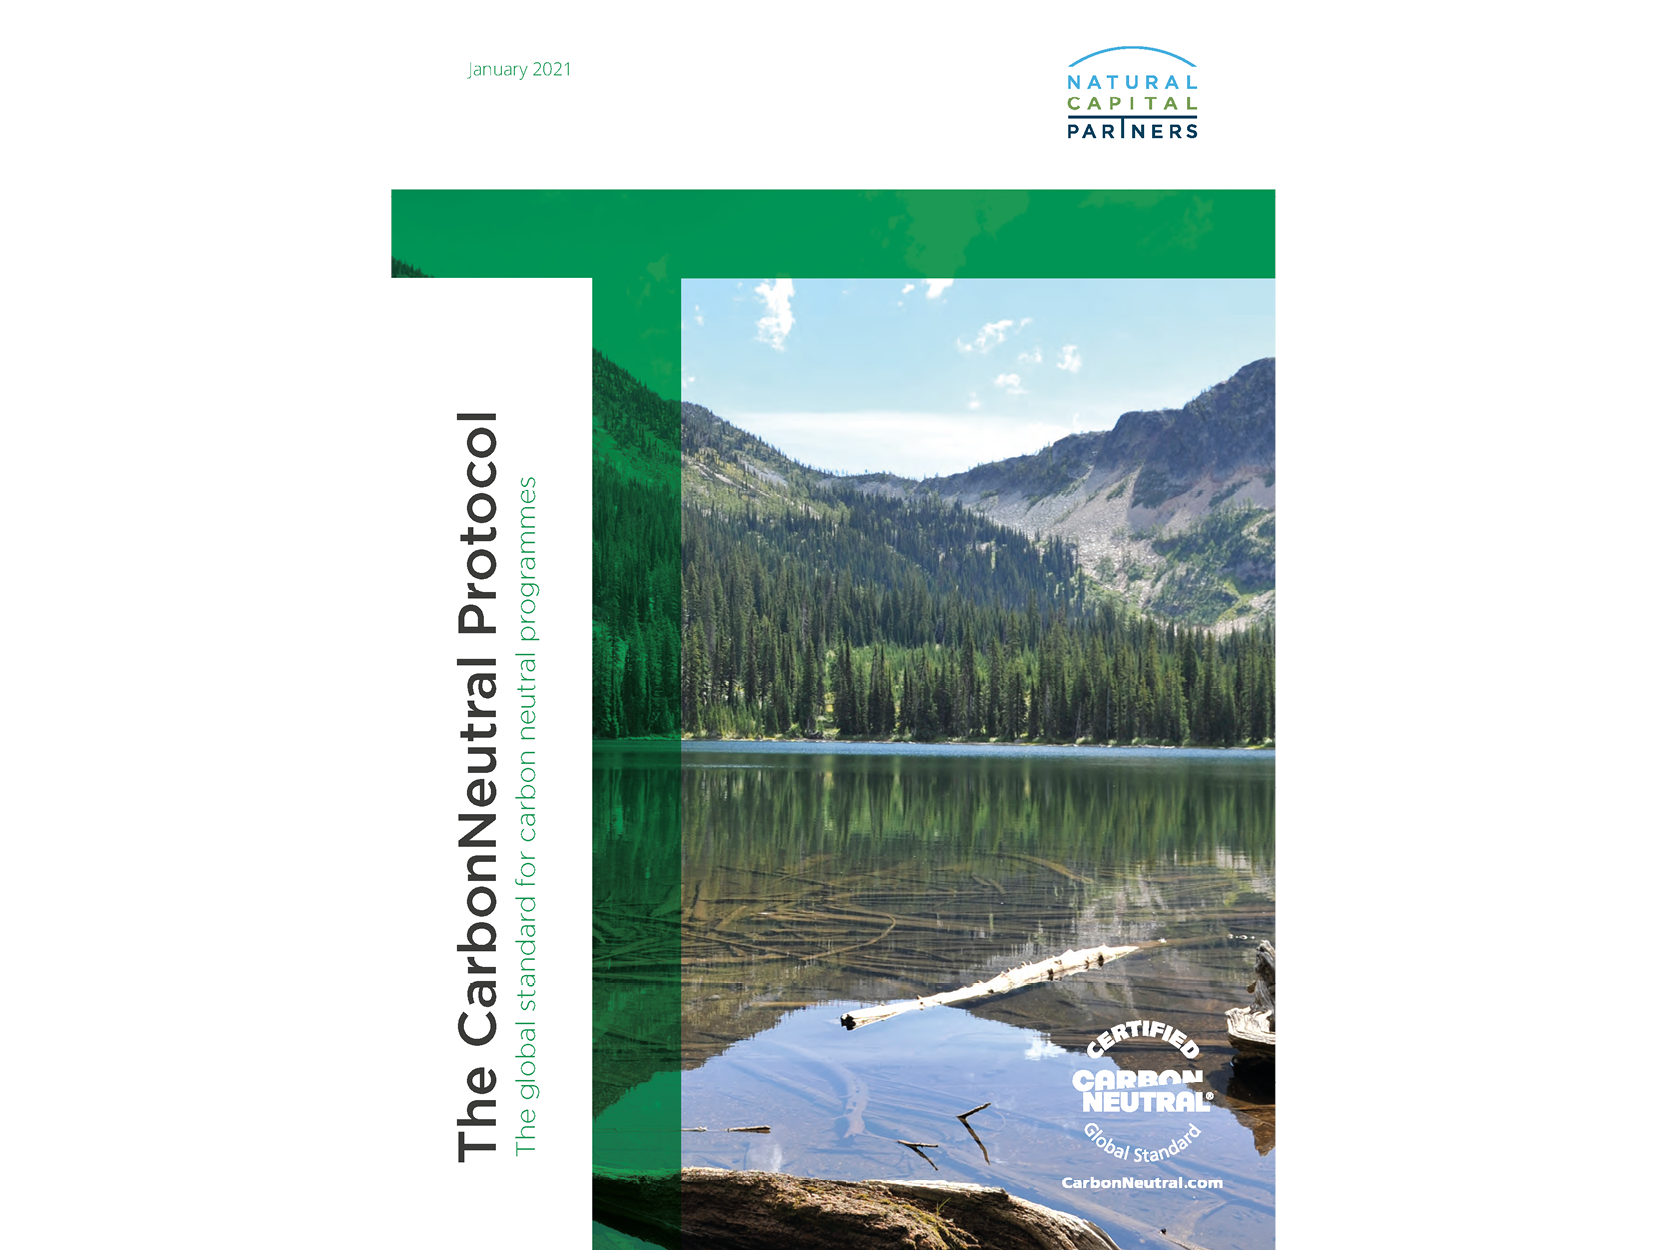 Launching the updated CarbonNeutral Protocol: the framework for high impact corporate climate action